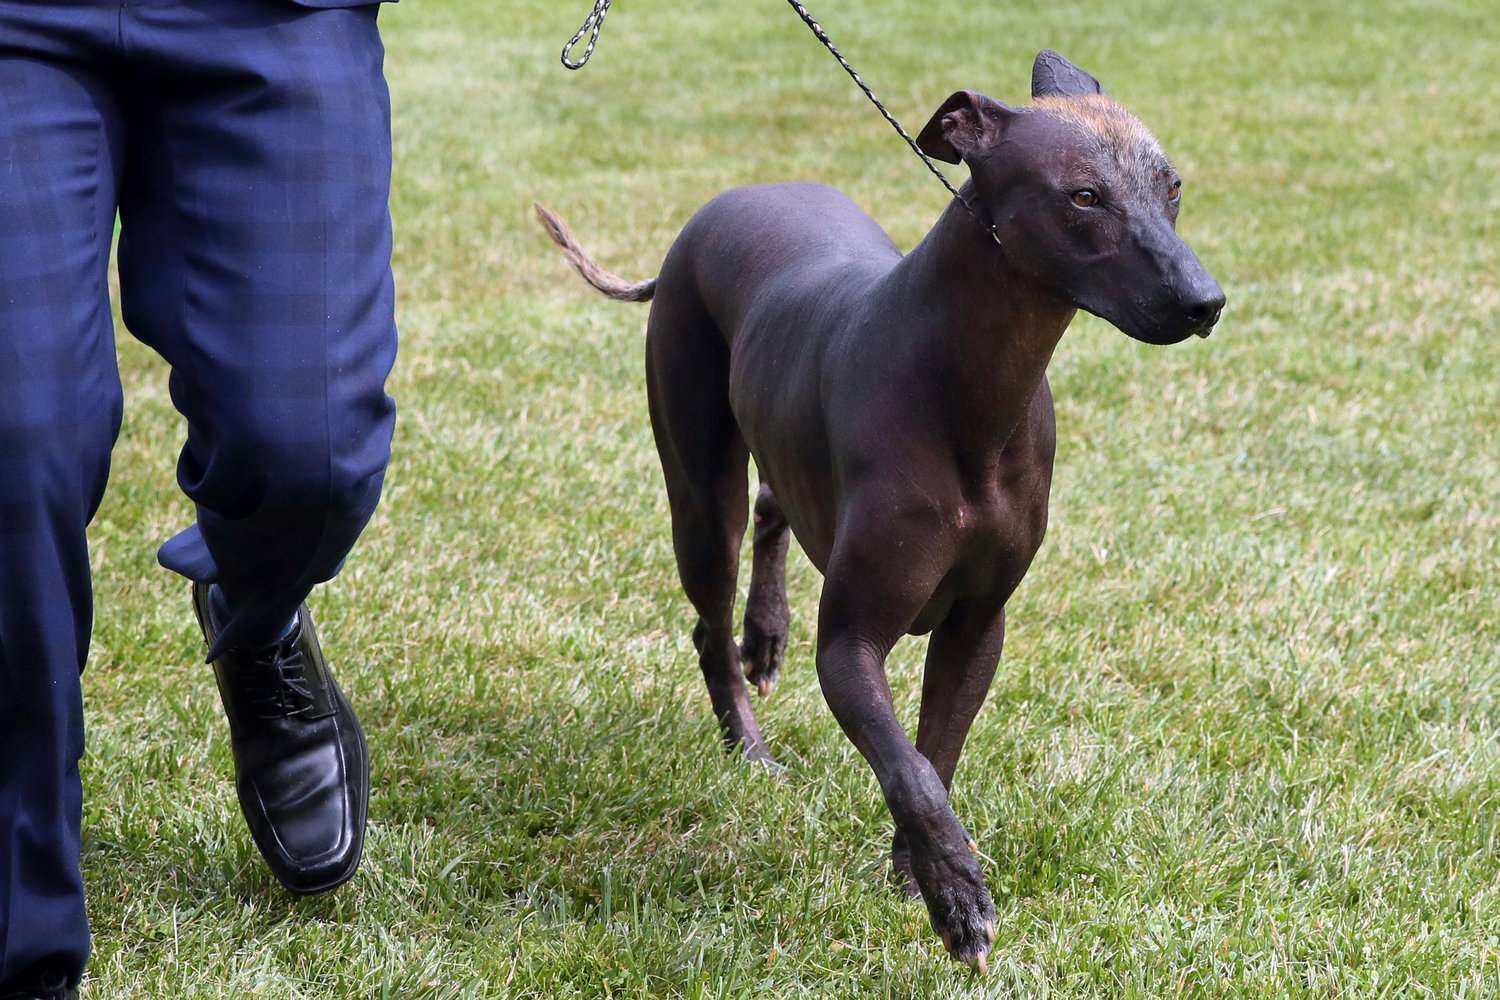 A Xoloitzcuintli competes at the Westminster Kennel Club Dog Show, Tuesday, June 21, 2022, in Tarrytown, N.Y. The Xolo, as it's known for short, is an often hairless breed that originally comes from Mexico.